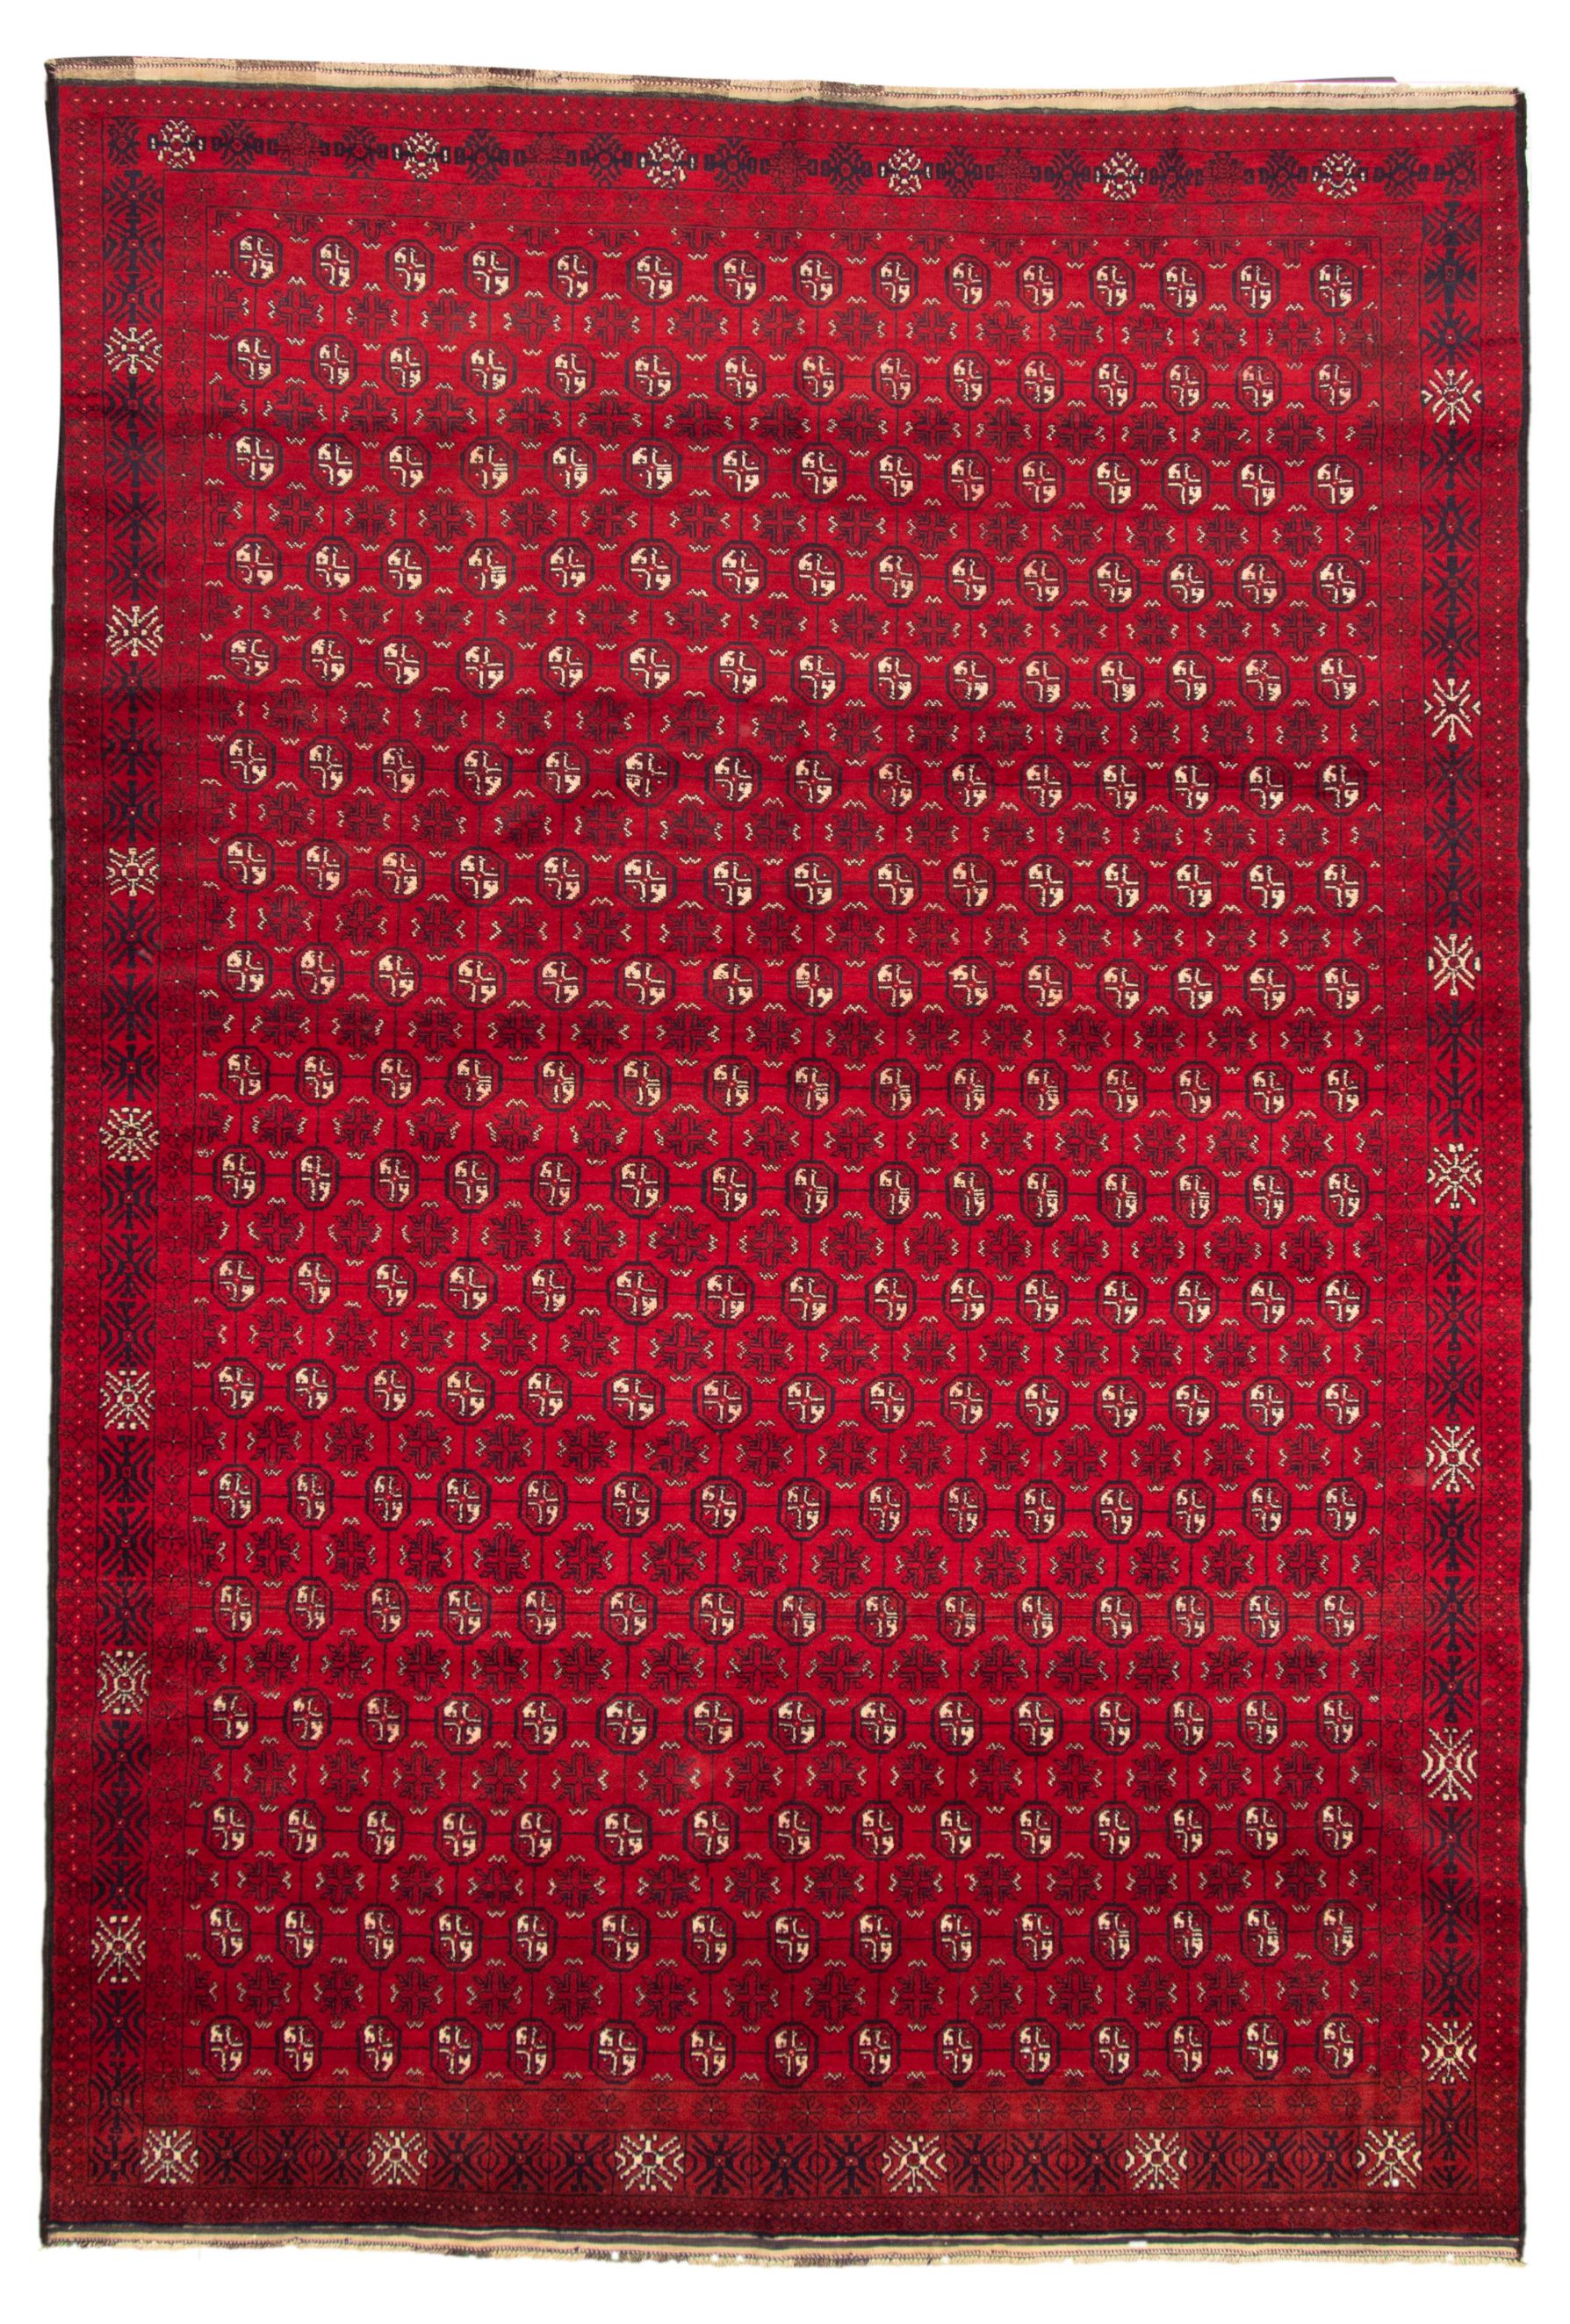 Hand-knotted Teimani Red Wool Rug 8'6" x 12'6" Size: 8'6" x 12'6"  